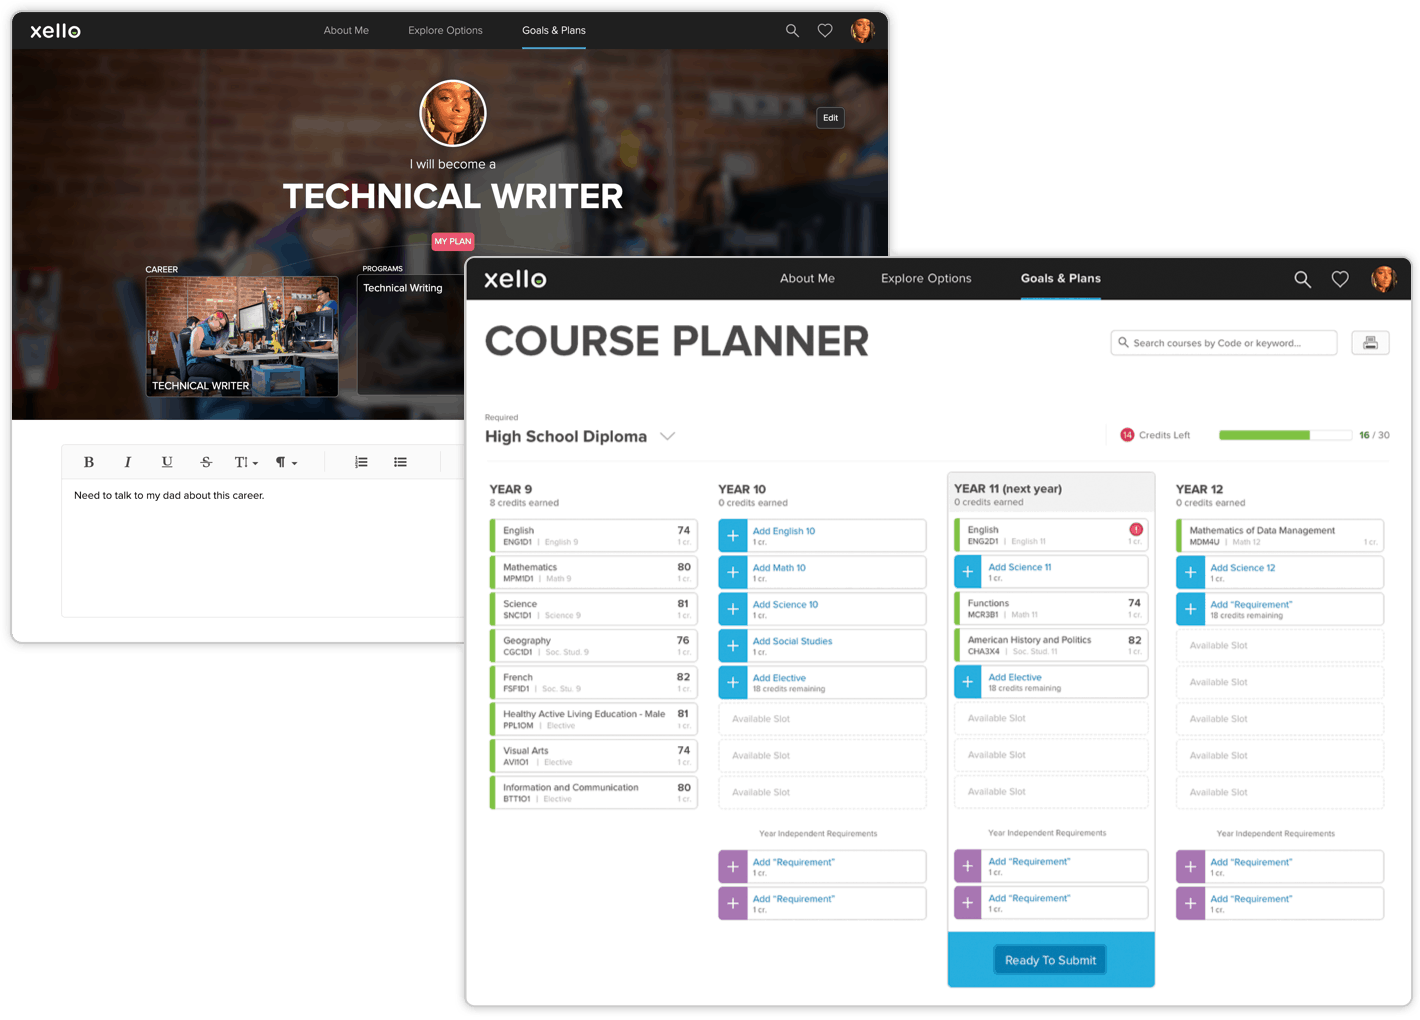 Integrated course planner and interactive plan builder